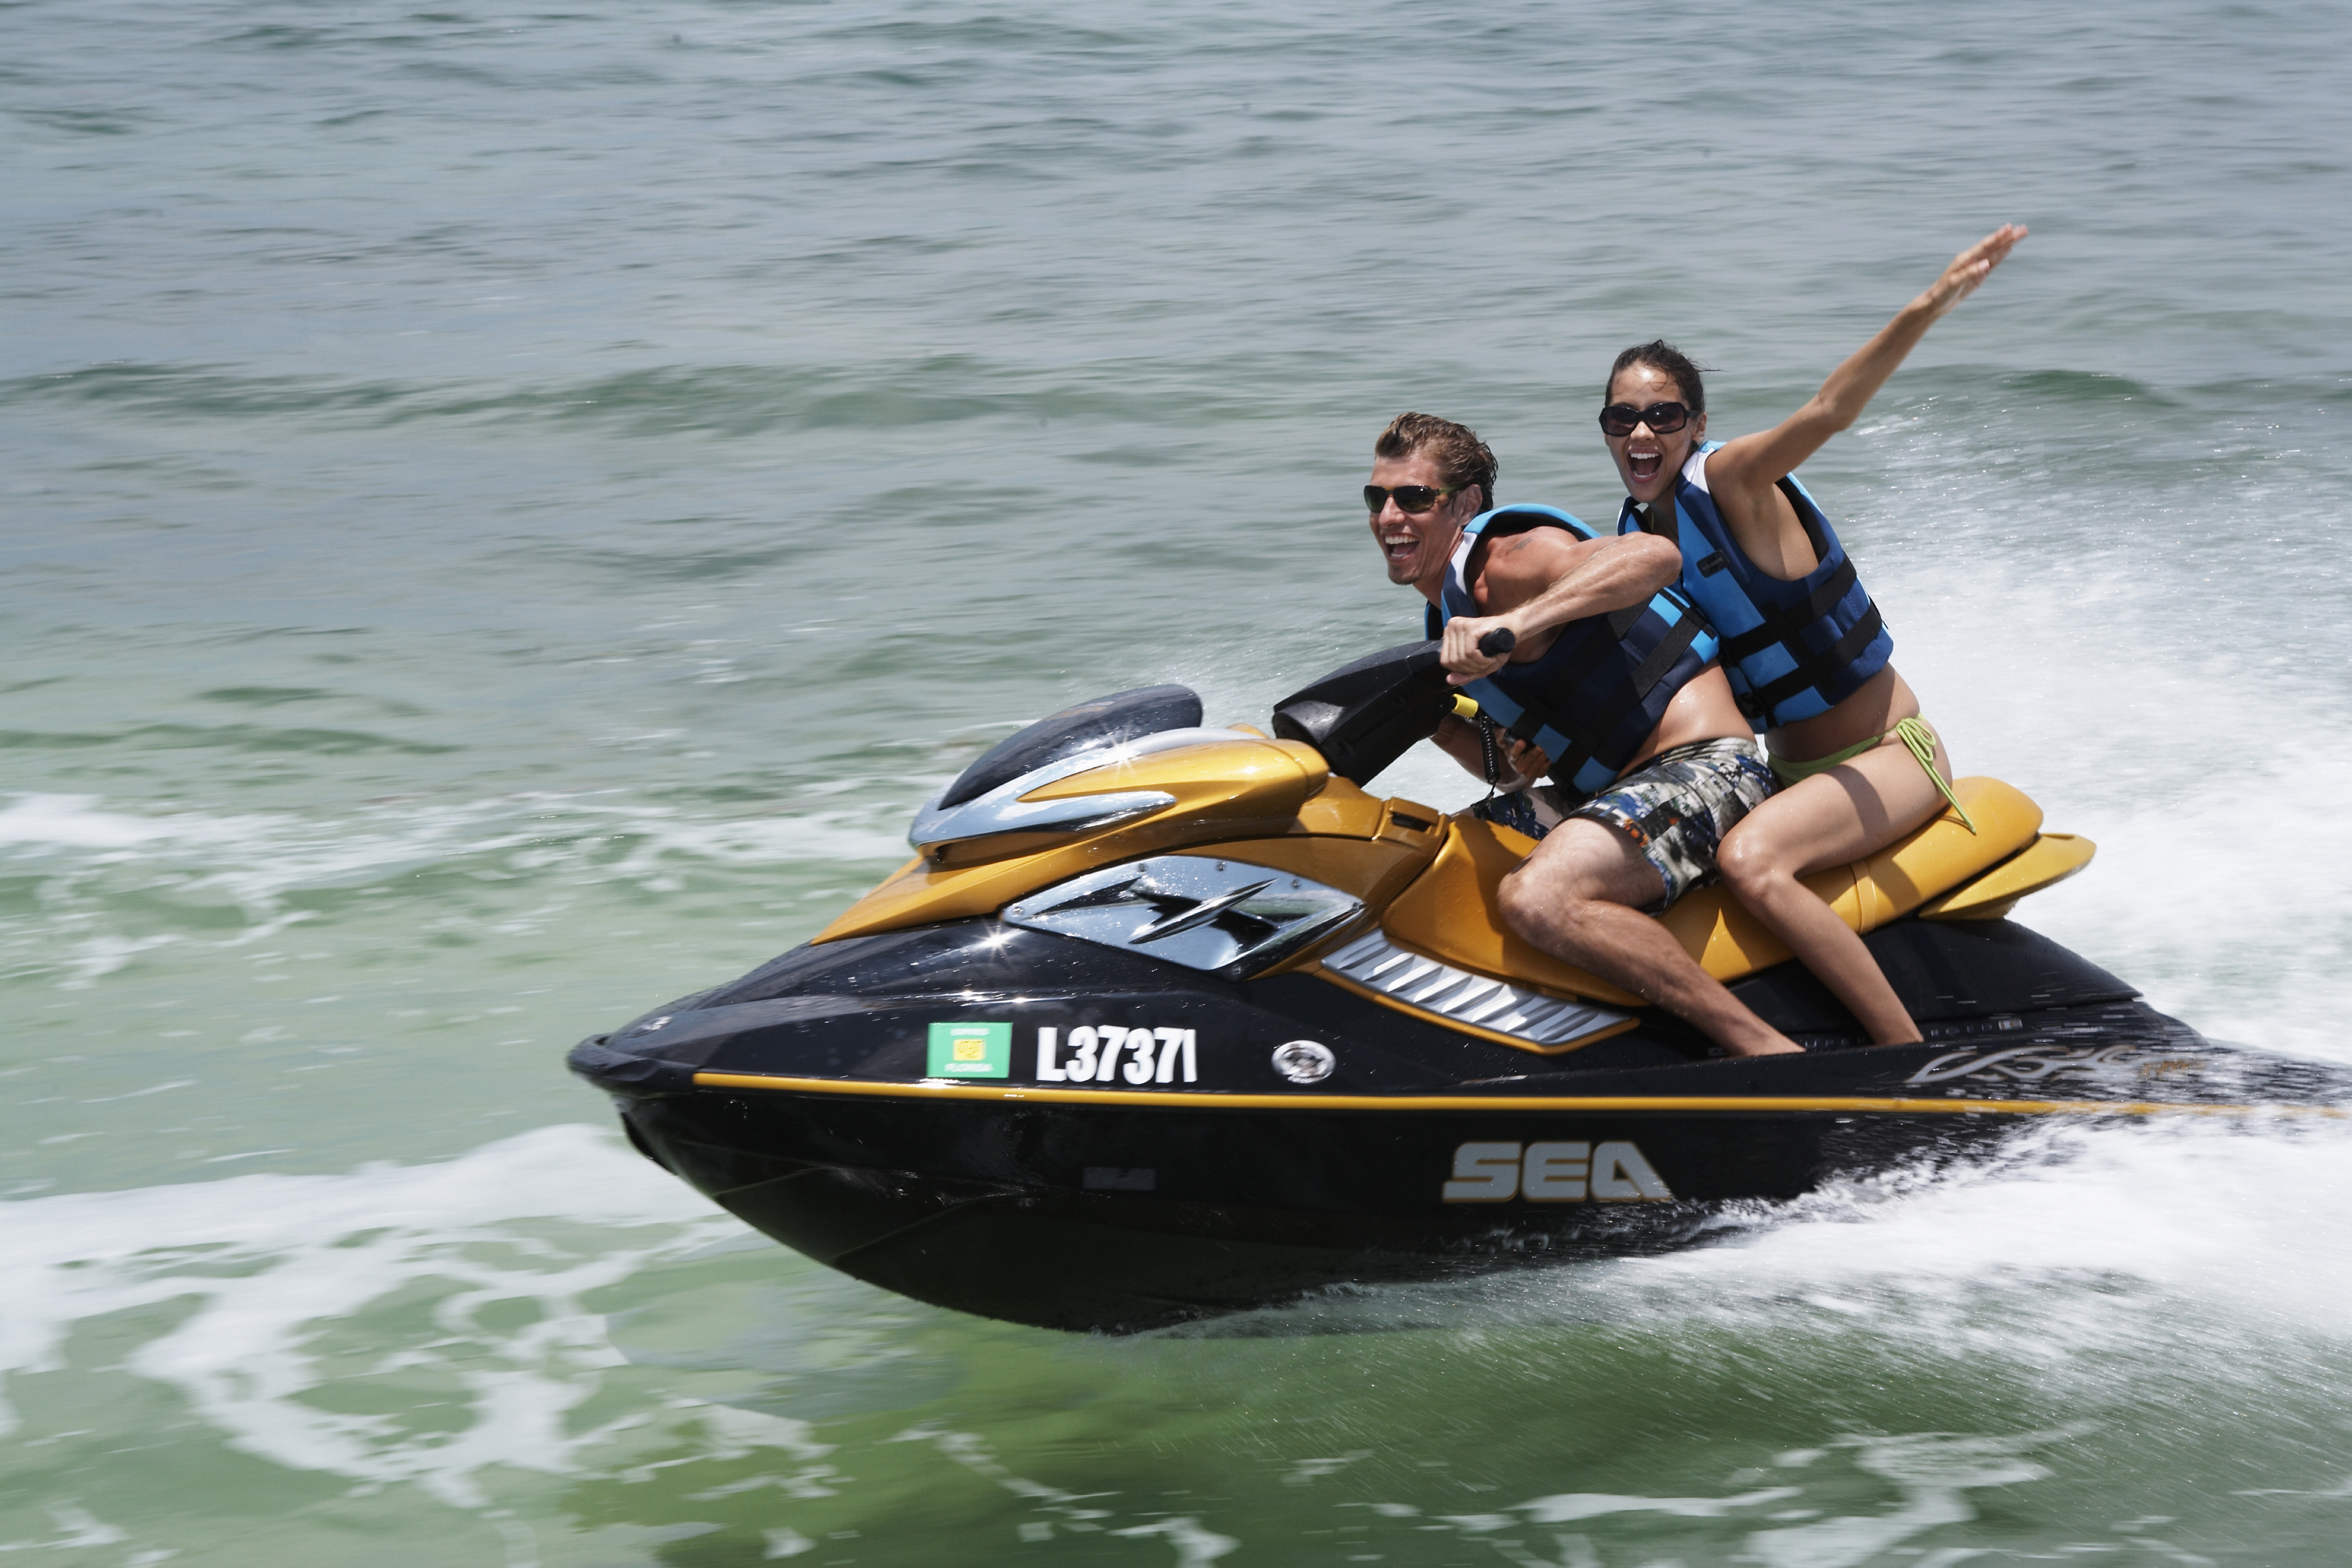 Myrtle Beach watersports: Thrills and adventure on the water